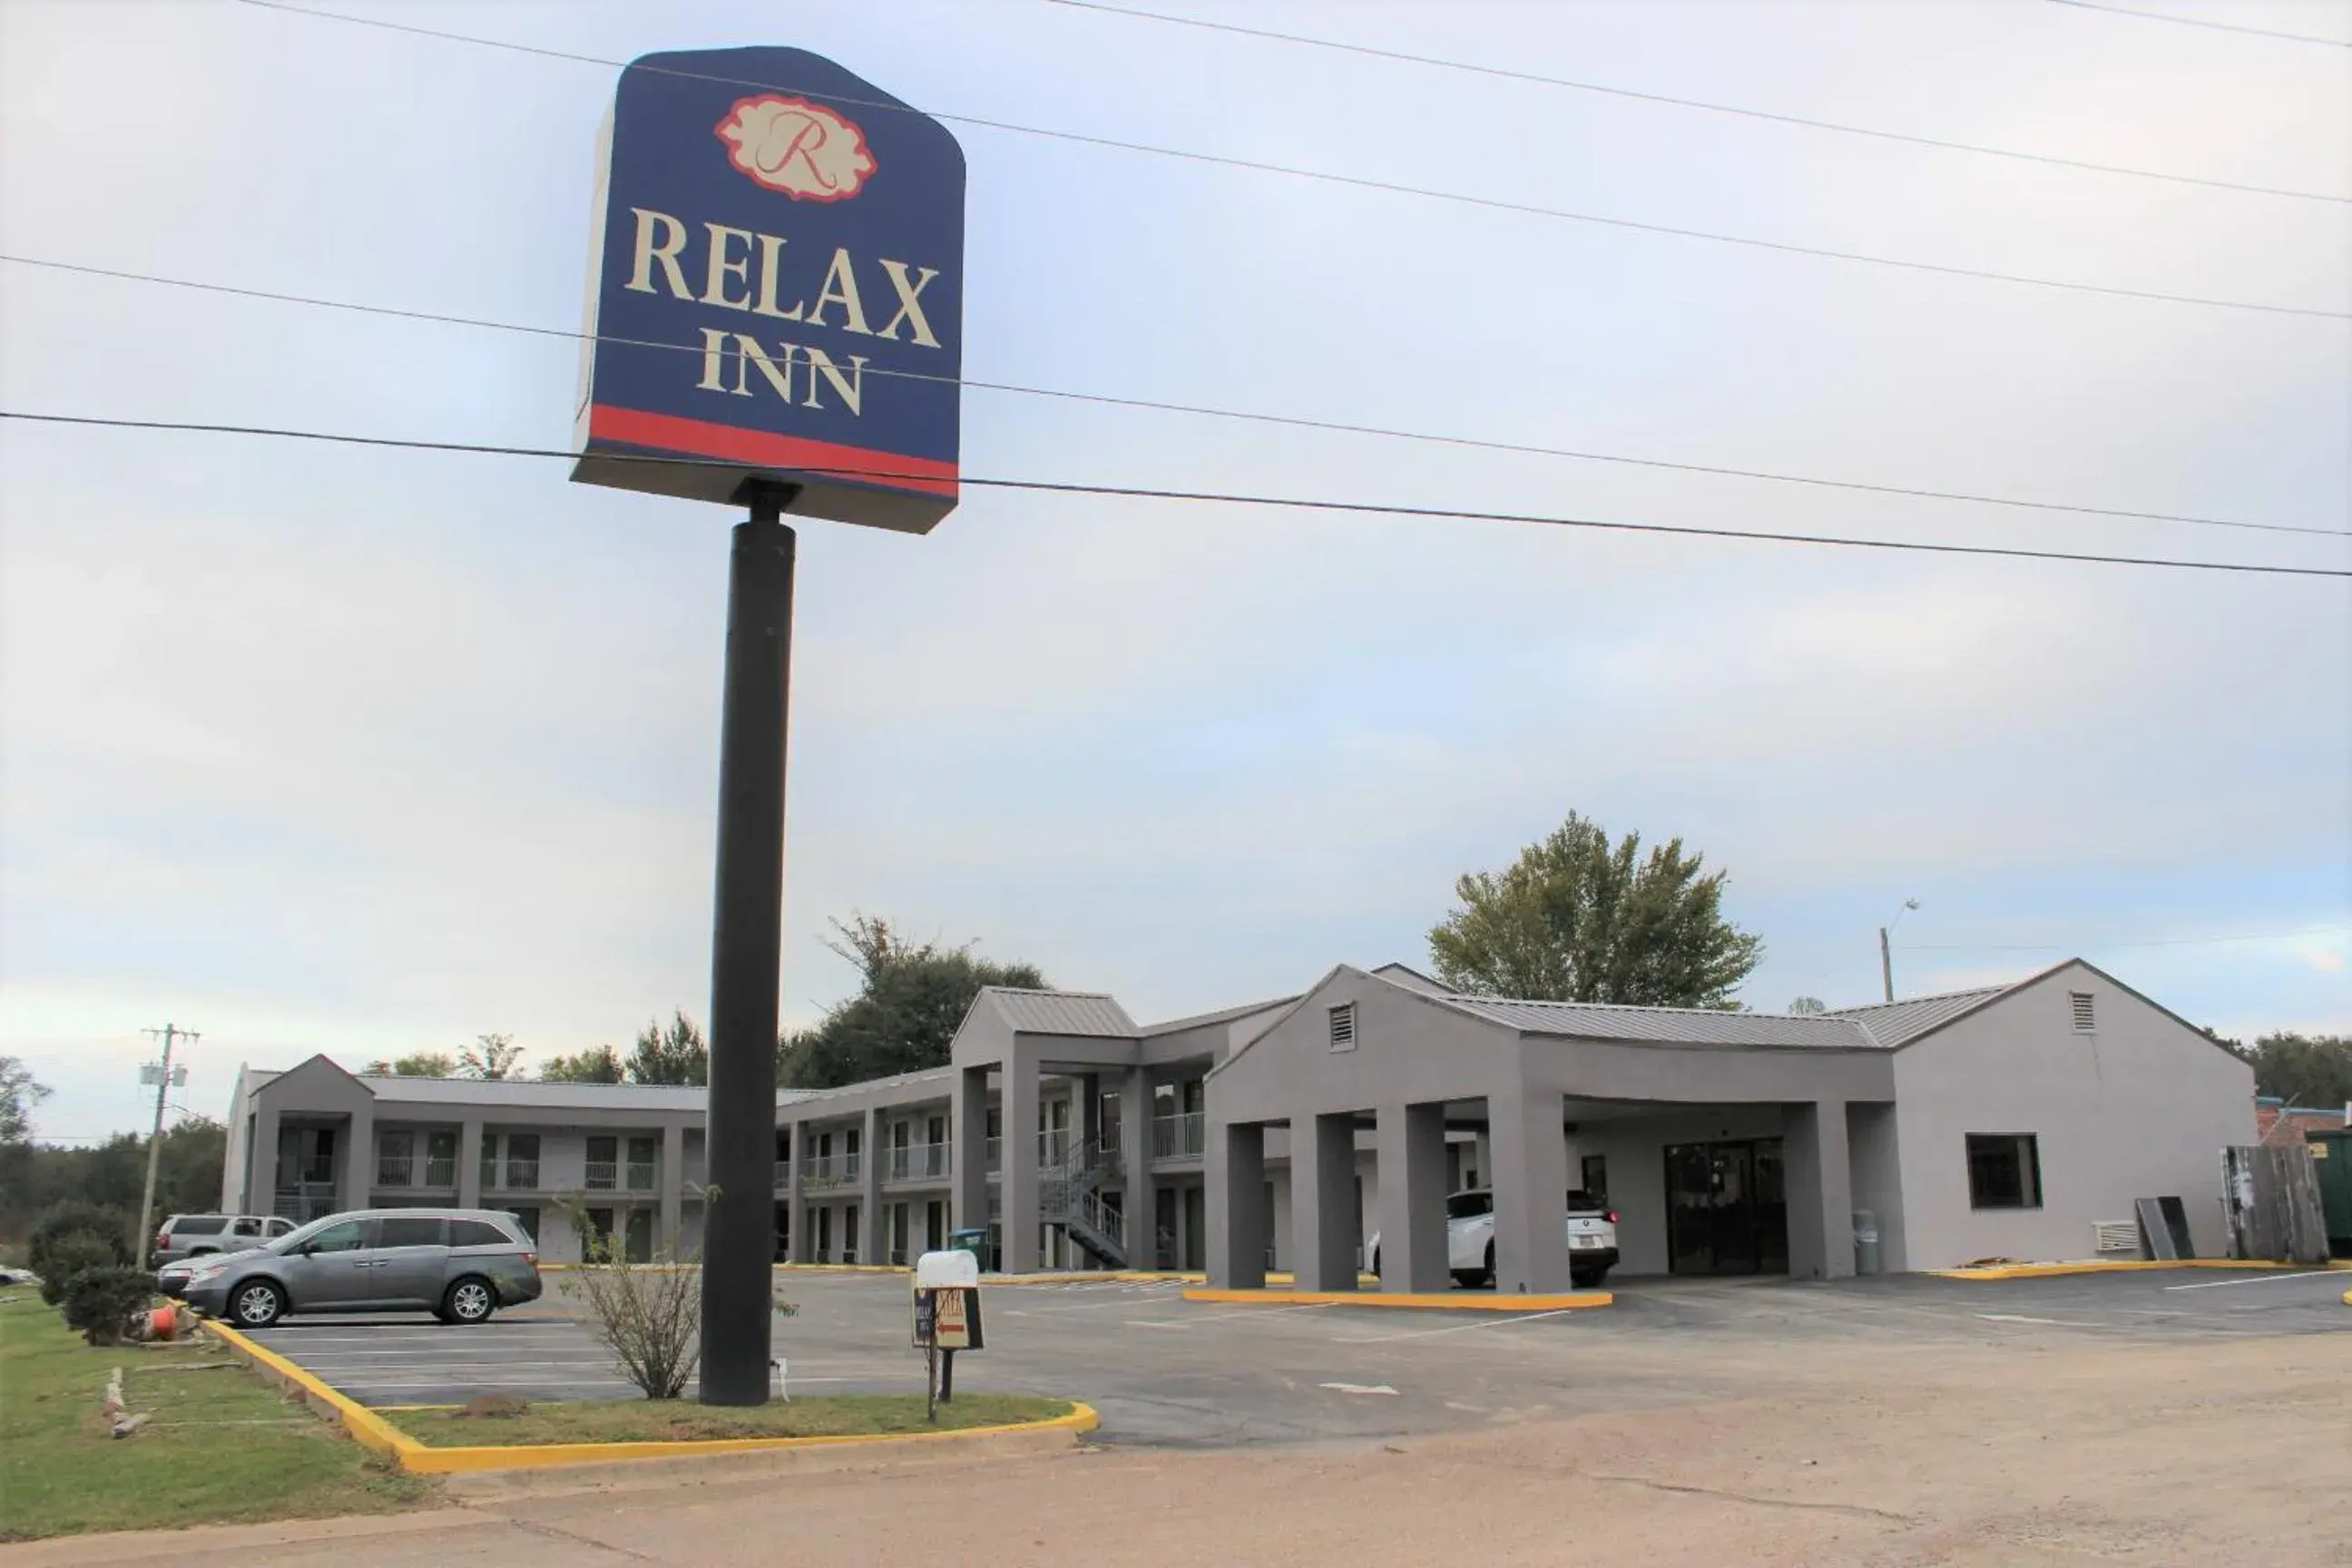 Property Building in Relax Inn